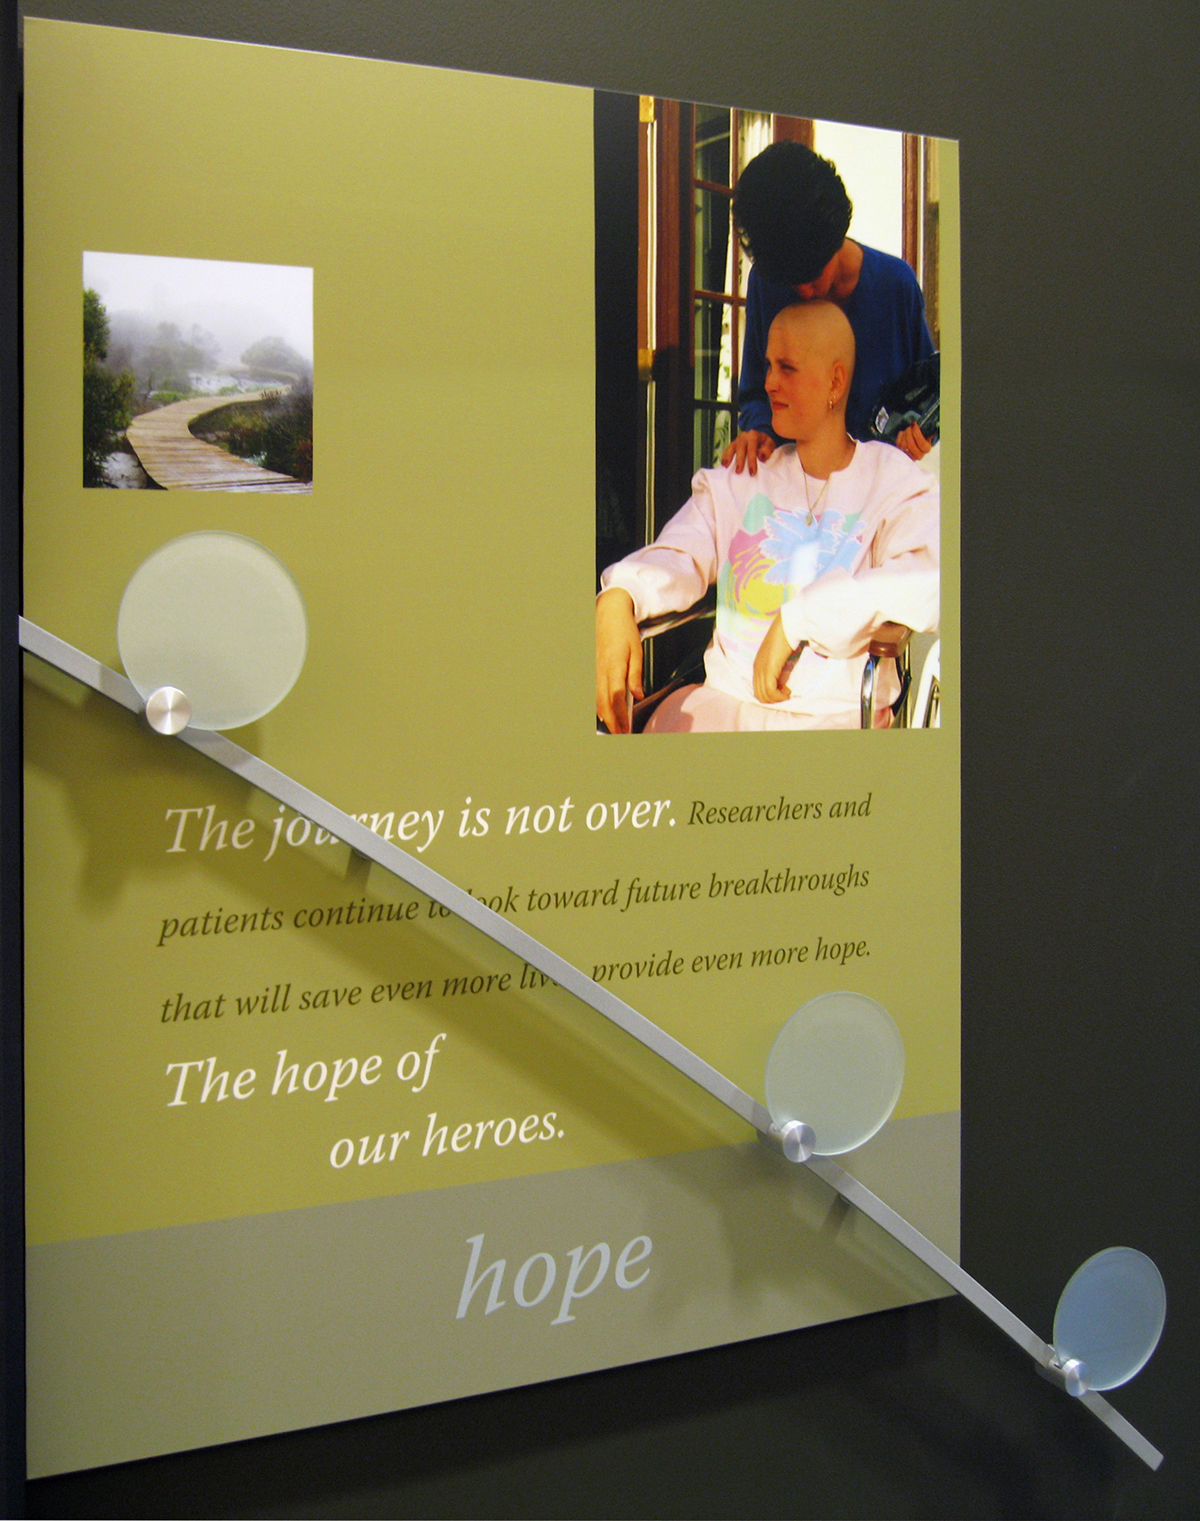 fred hutchinson EXHIBIT DESIGN healthcare Cancer Research environmental graphics visitor experience